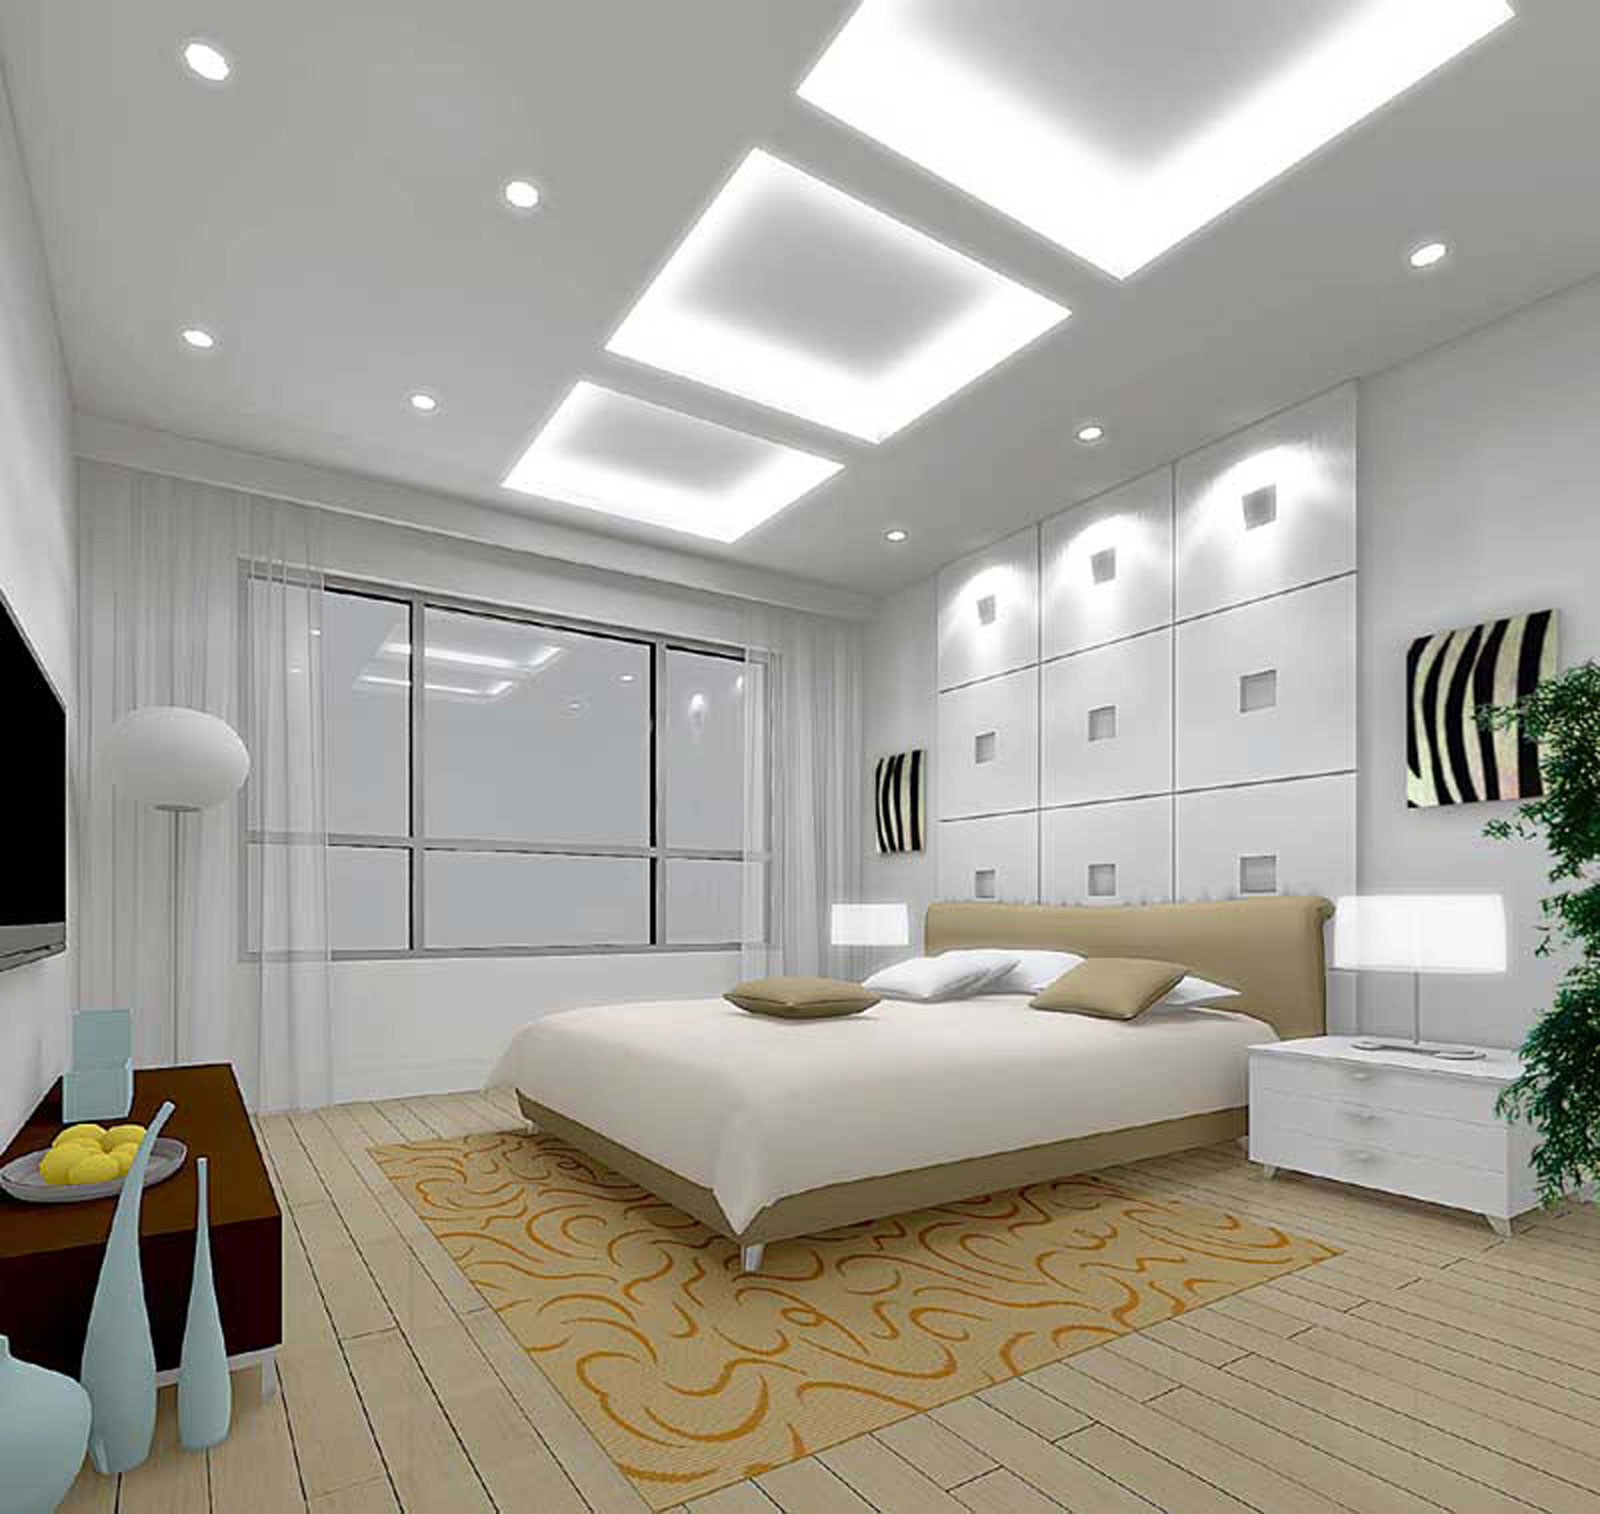 Bedroom Ceiling Soft Fascinating Bedroom Ceiling Lights Brightening Soft Bed Design And Cool Lamp Shade Also Hanging Tv Cabinet Bedroom Beautiful Bedroom Ceiling Lights Your Stunning Home Needs